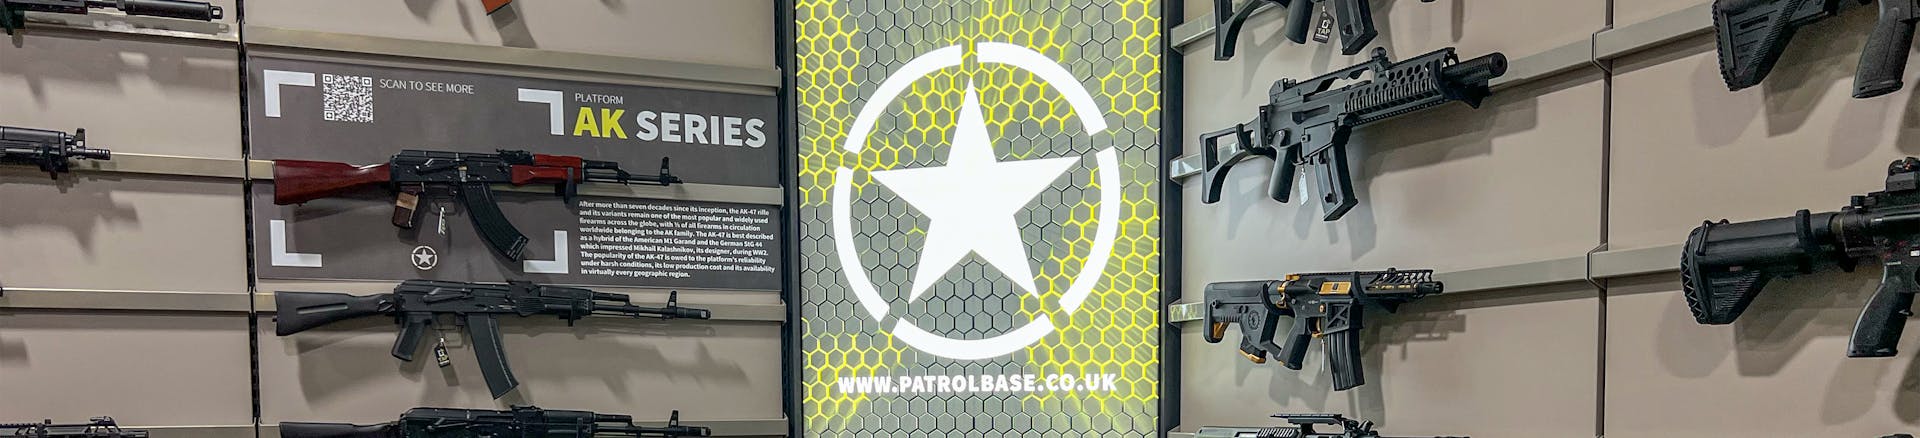 A picture of inside the Patrol Base Huddersfield Store